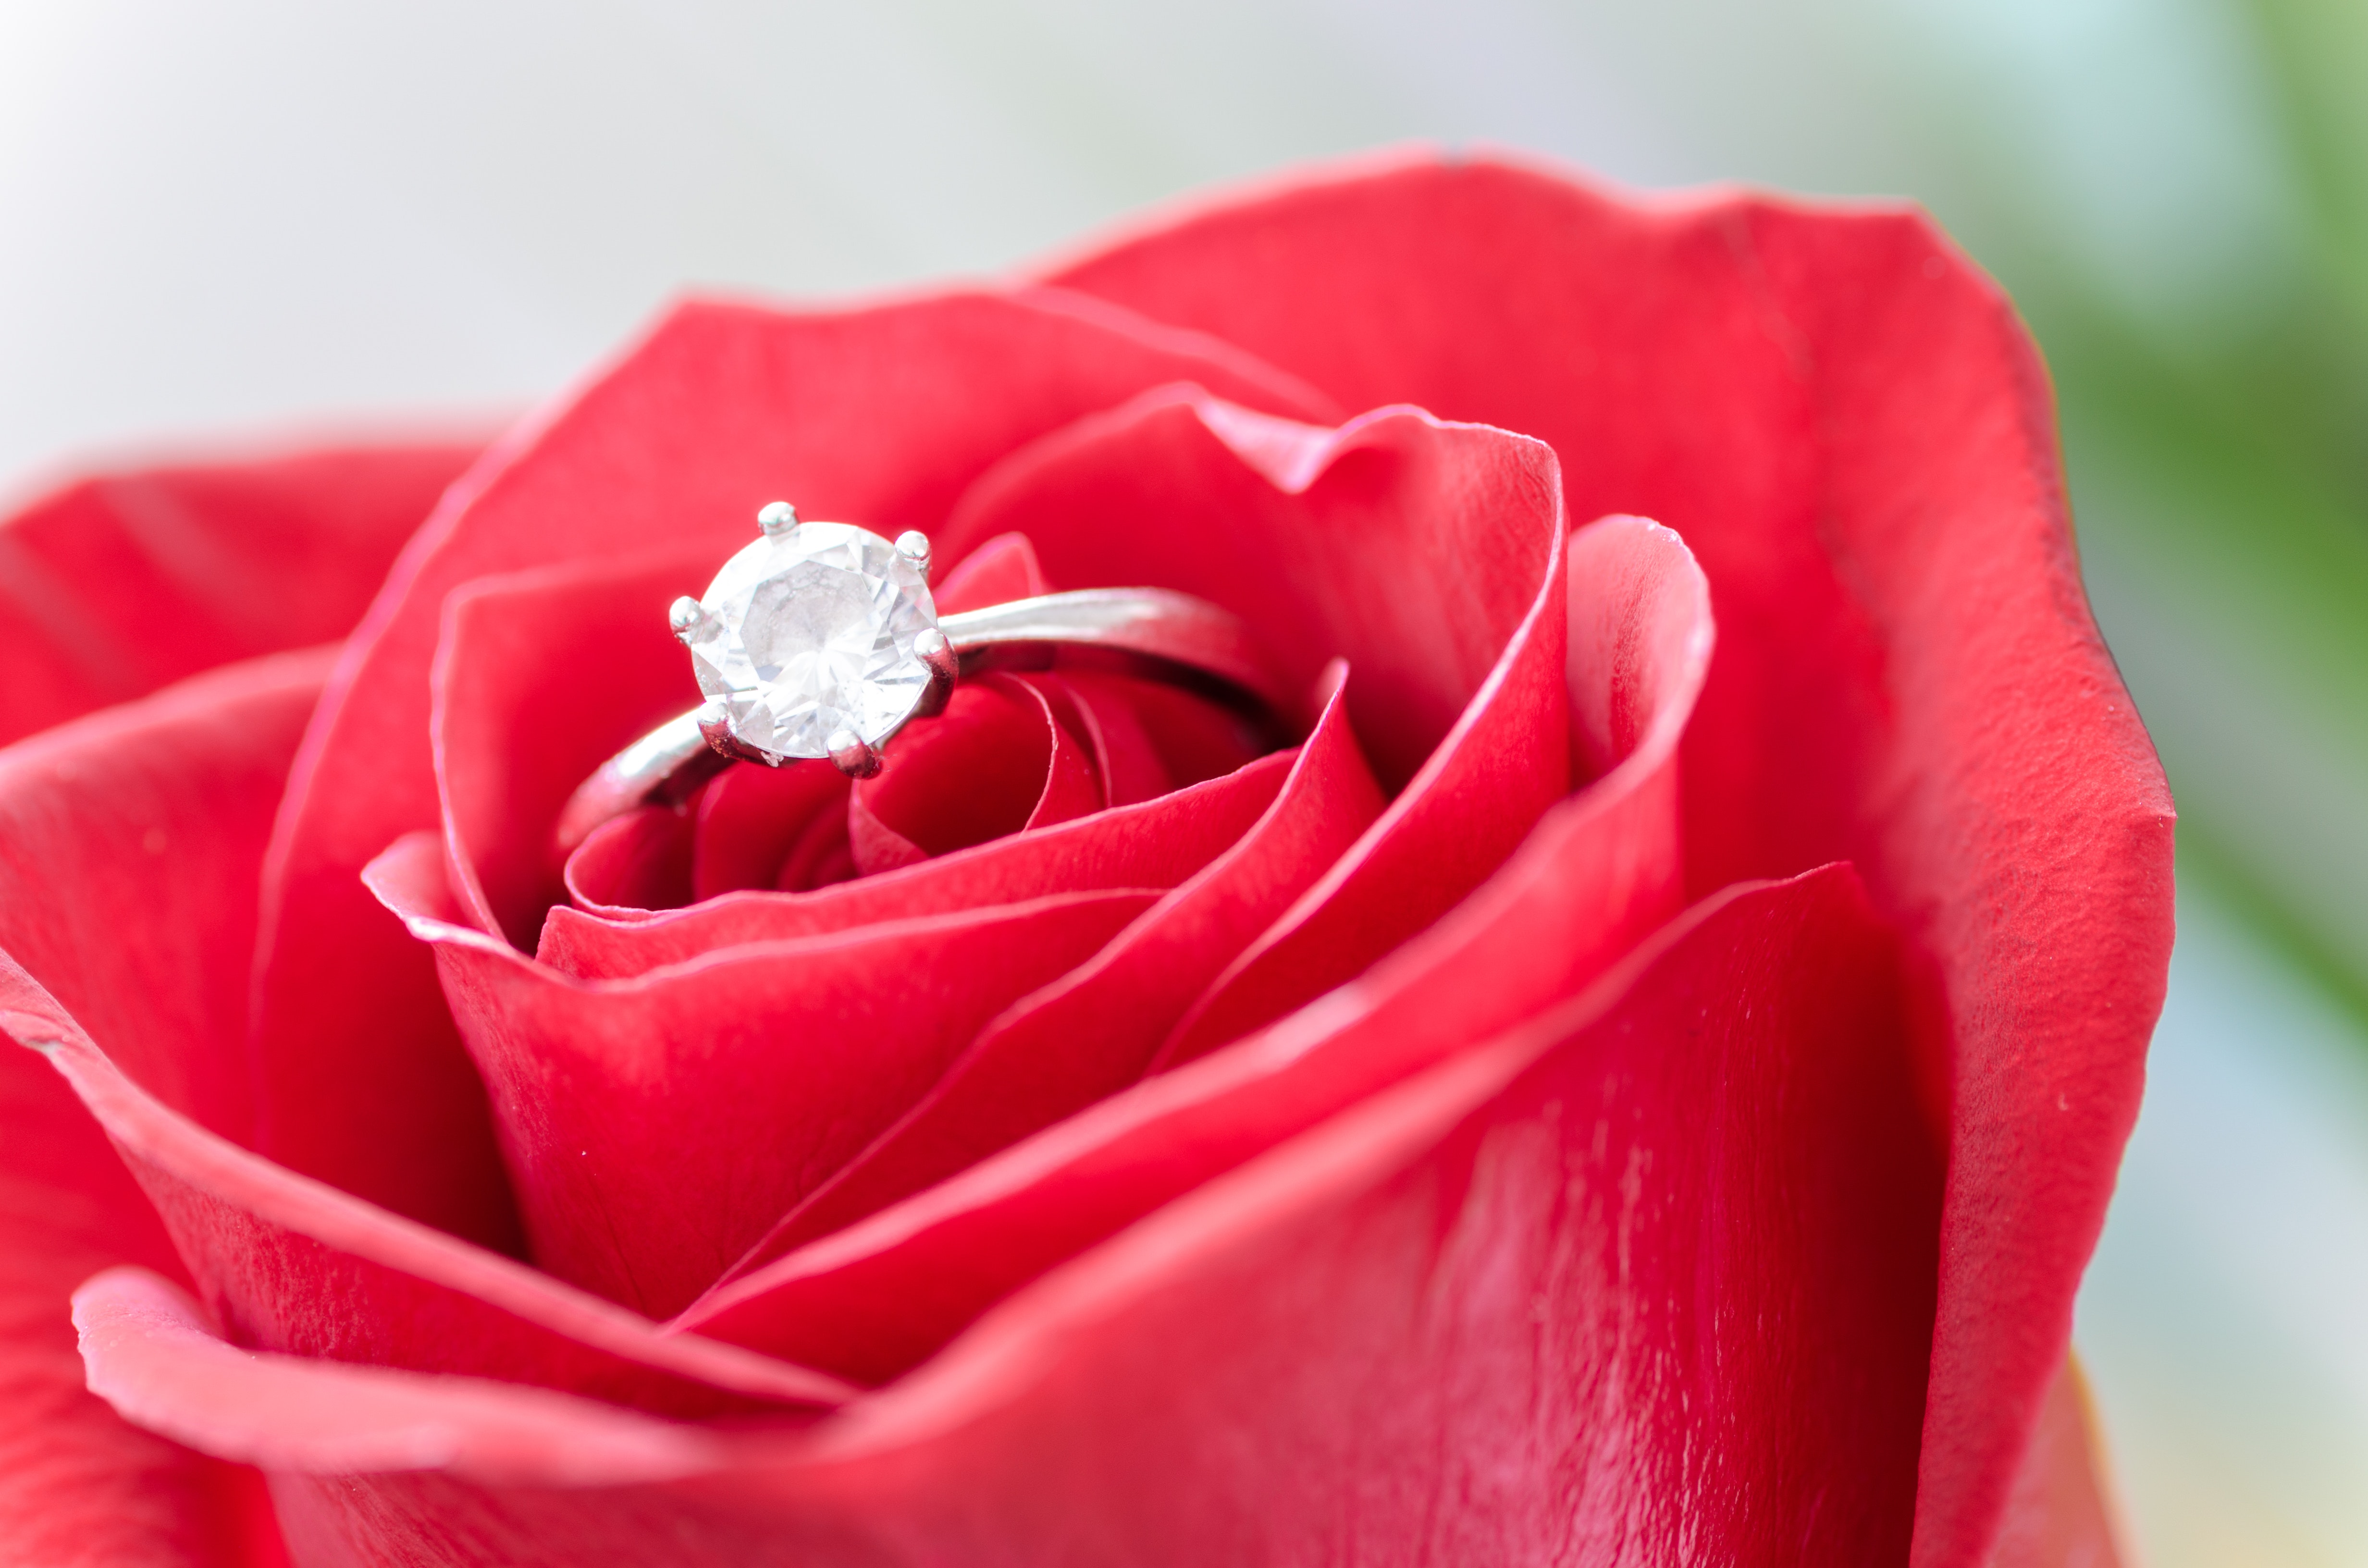 Silver diamond embed ring on red rose photo